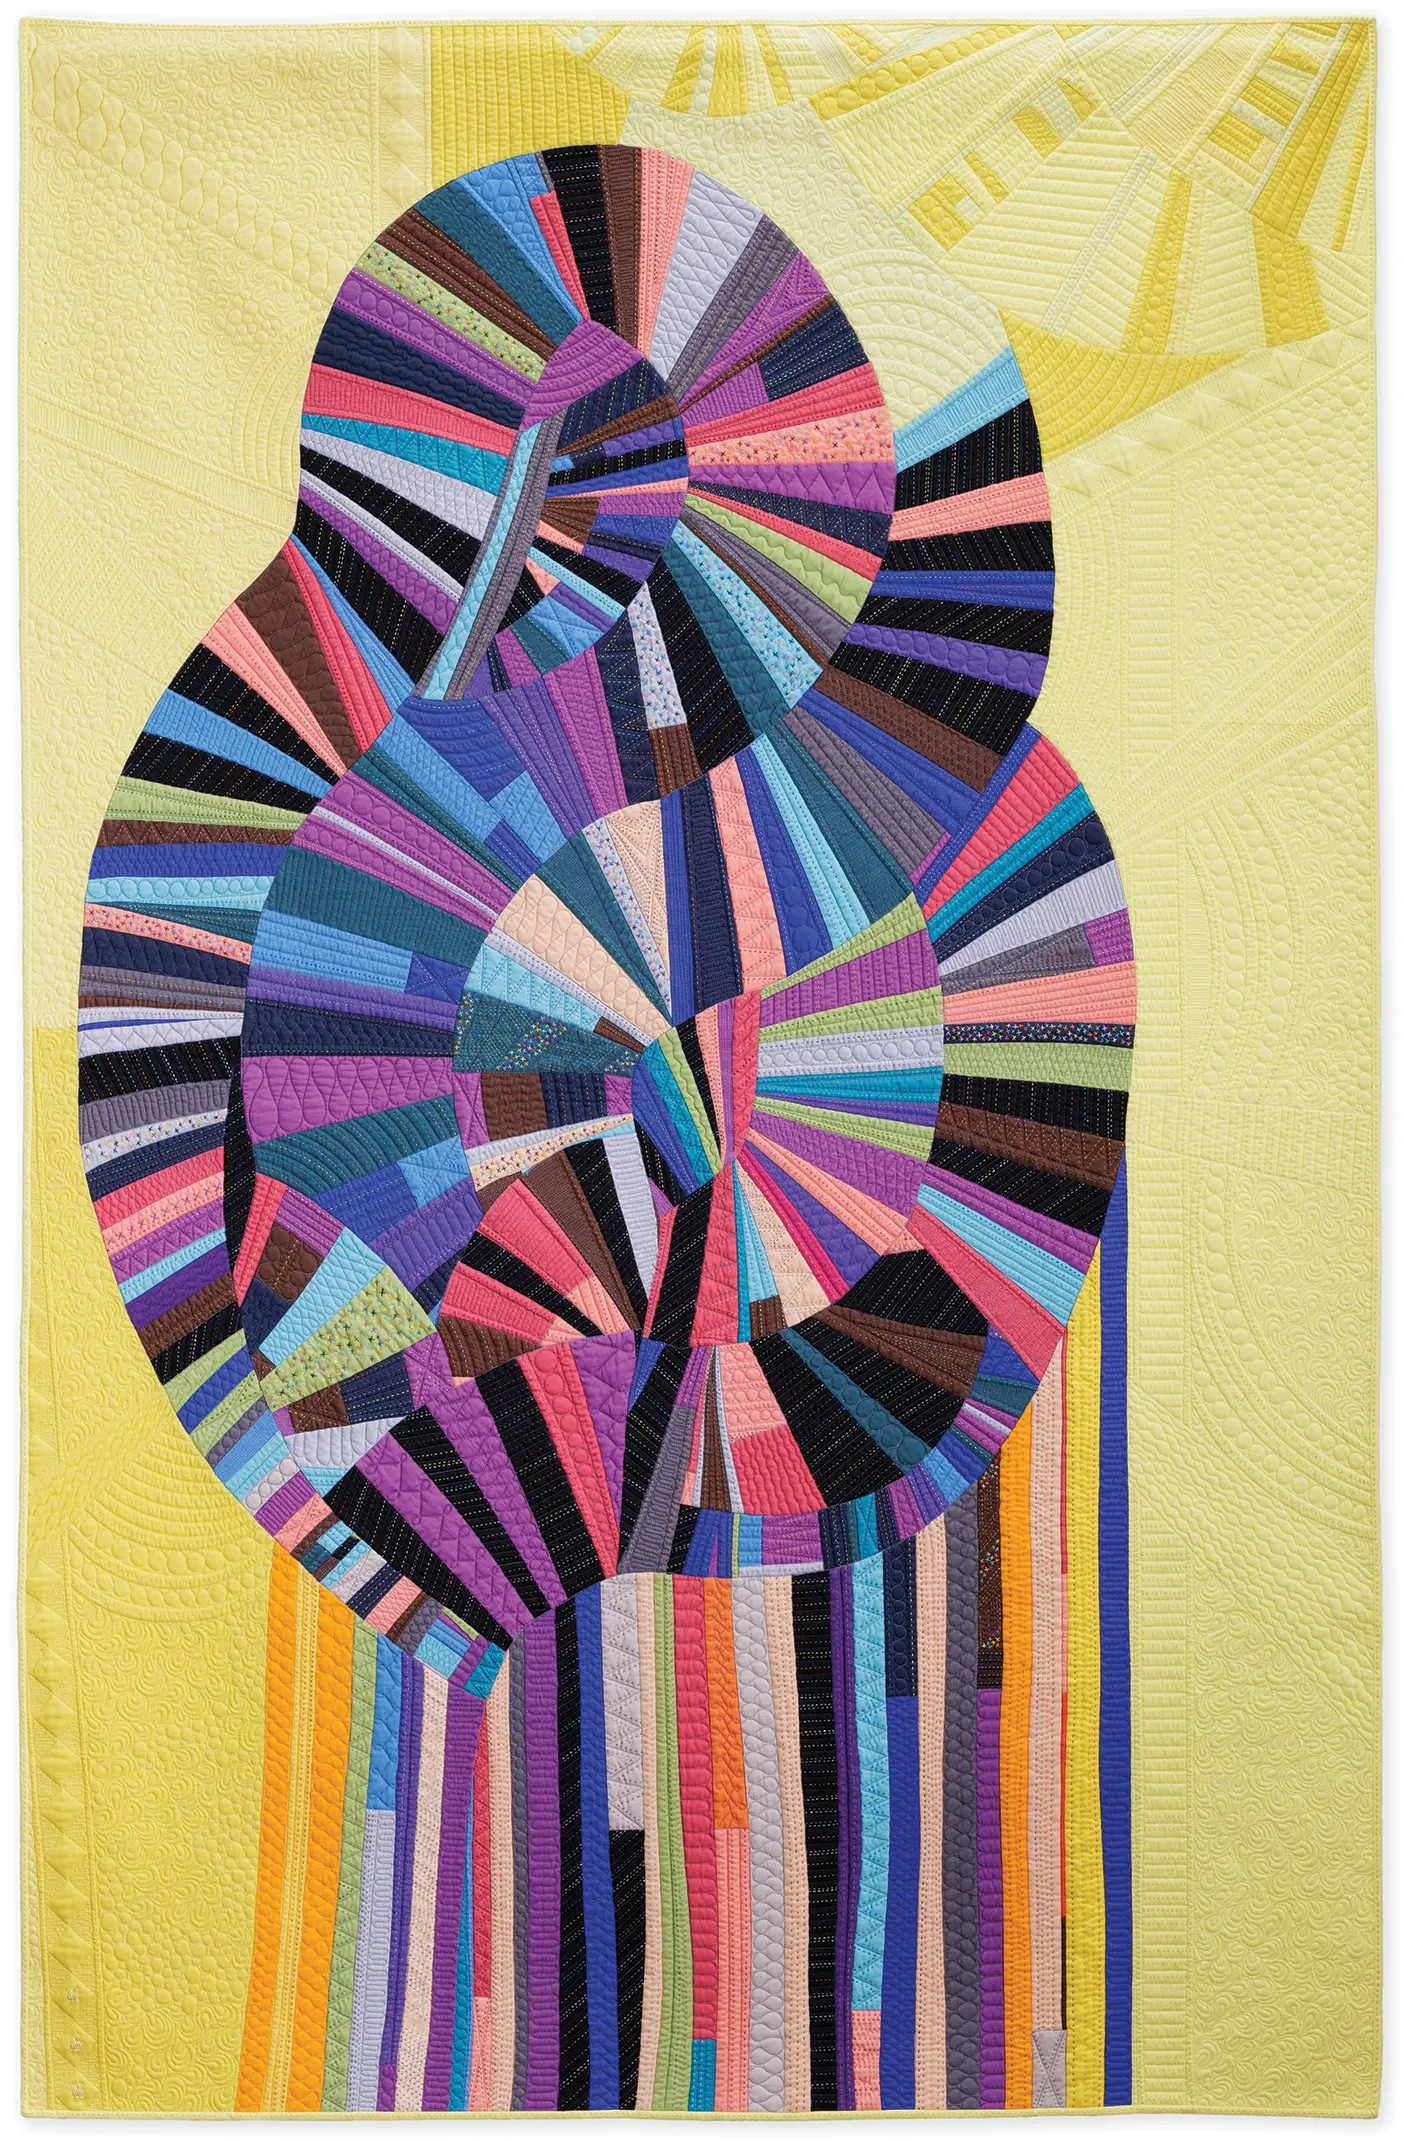 Burton’s award-winning quilt Madonna features a colorful swirl of various fabrics and colors--pink, purple, brown, green, salmon, orange, and black. Tassel like rectangular strips stream down from the central swirling pattern, and all of it is set against a pale yellow background reminiscent of sunshine.